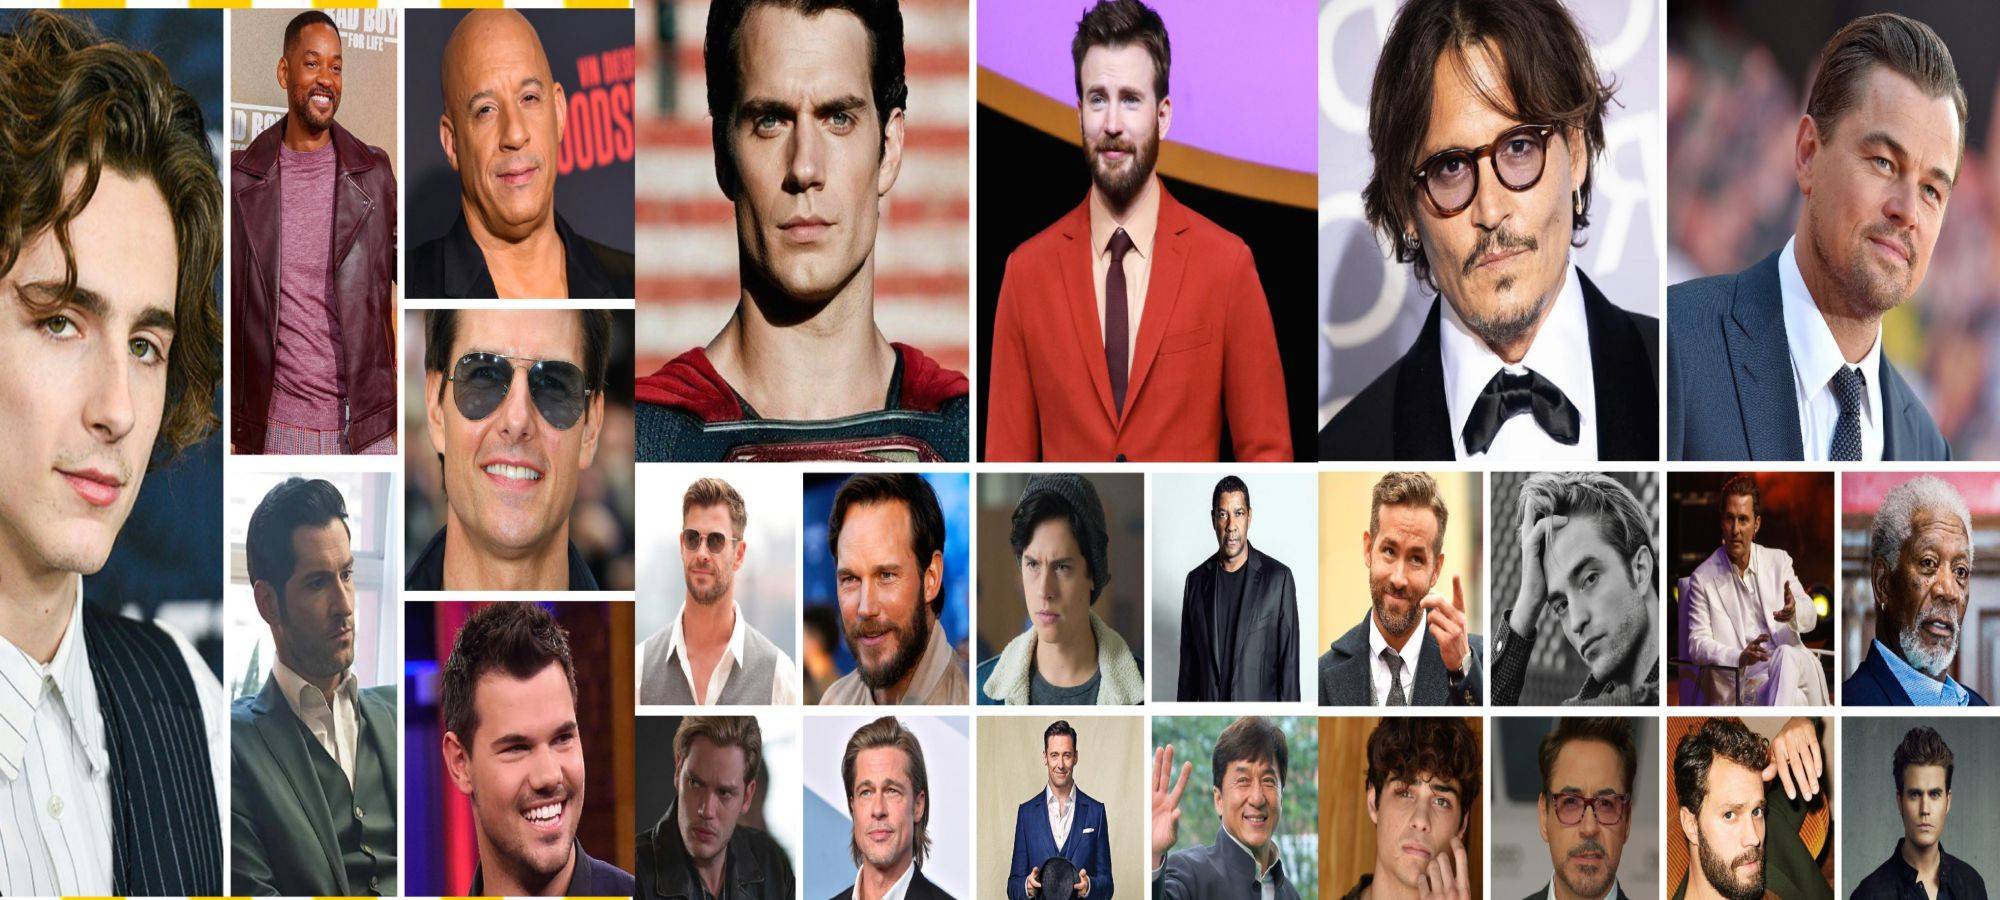 Top 25 Hollywood Actors and Their Mini-Biography